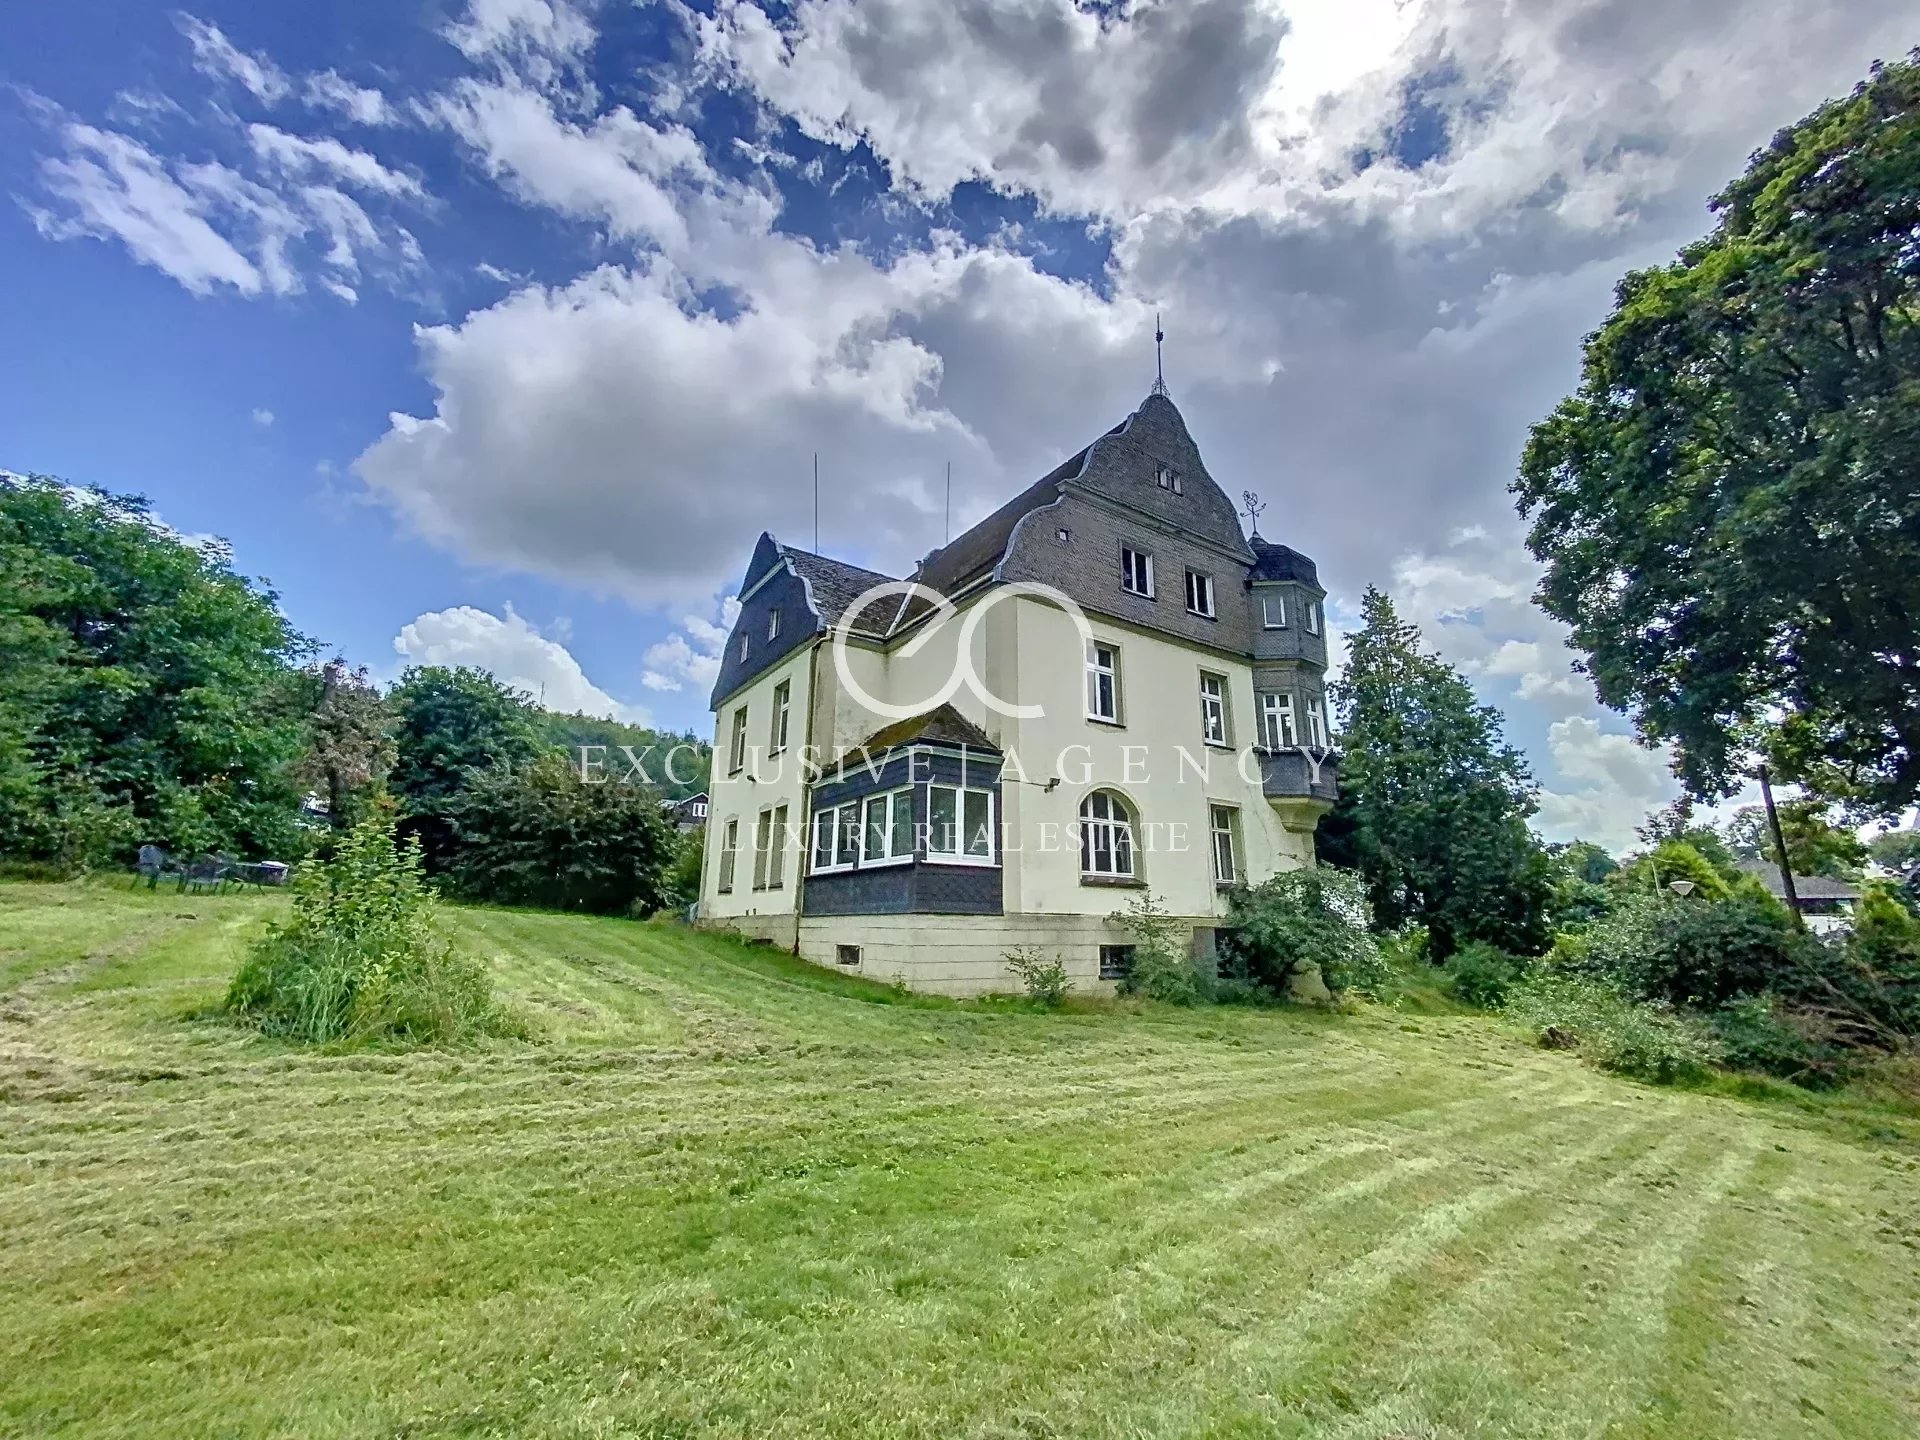 BAD FREDEBURG RESIDENCE OF 354SQM ON 3 LEVELS